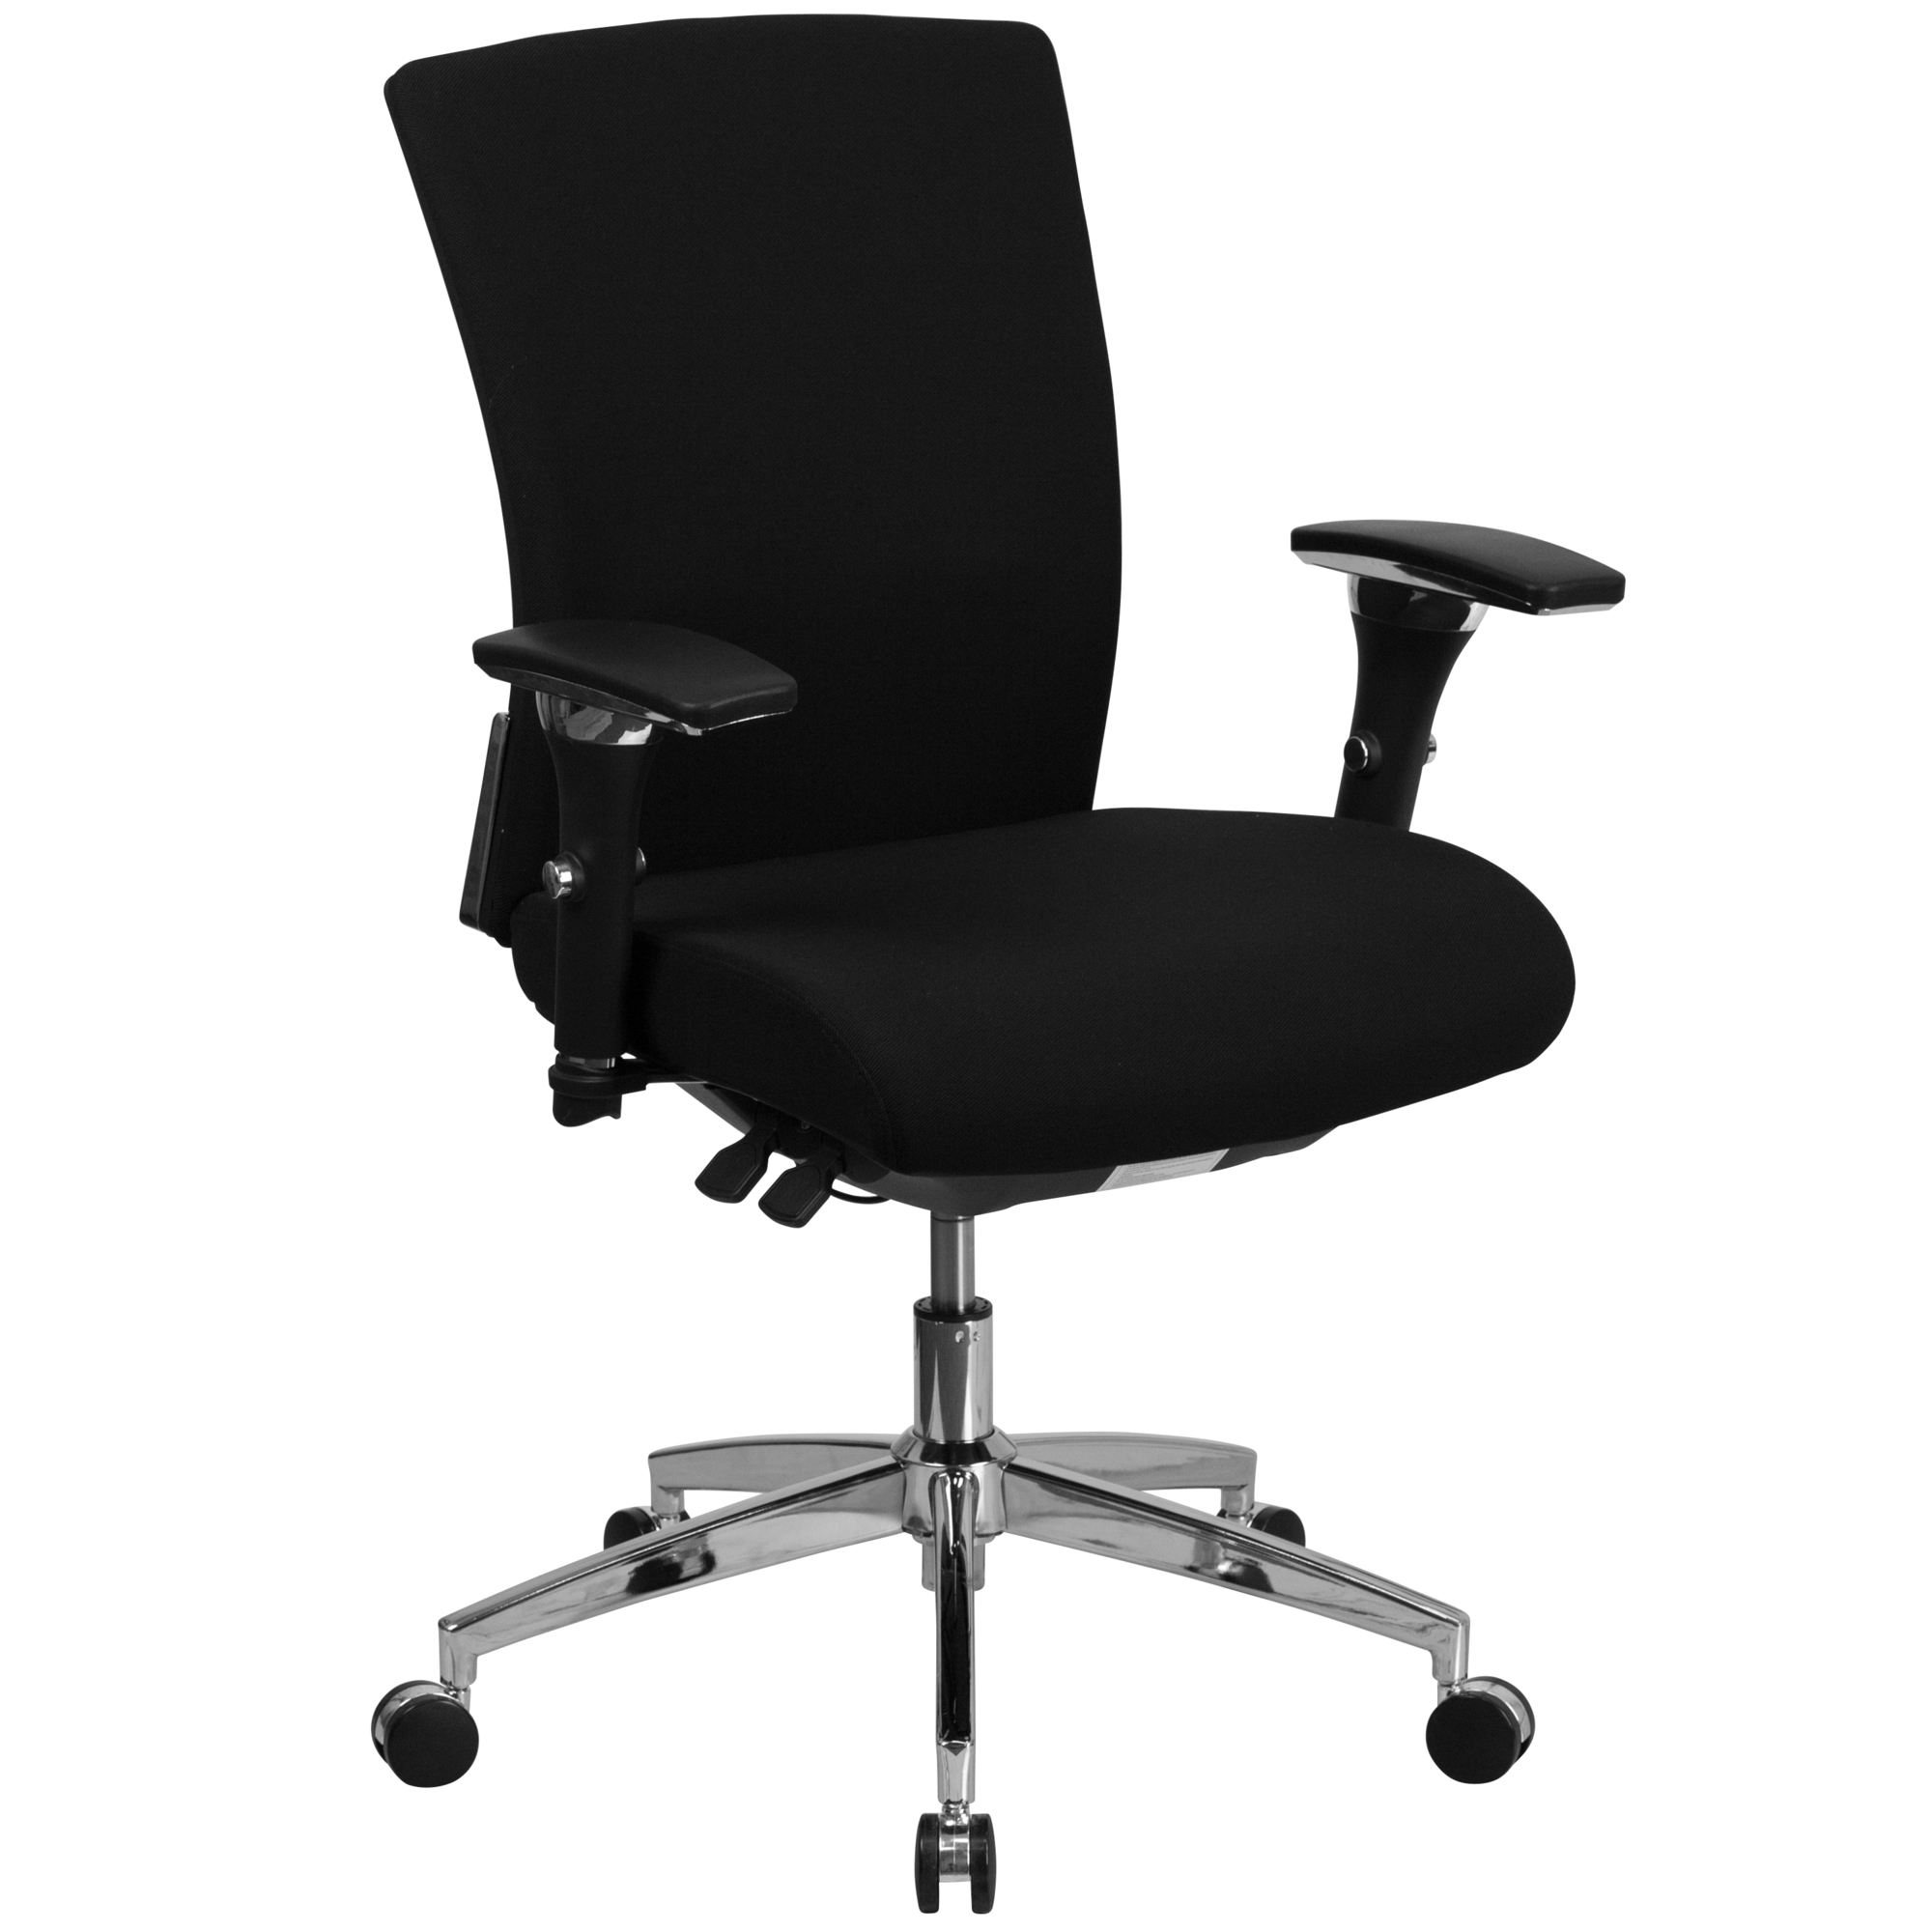 Flash Furniture, 24/7Inchtense Use 300 lb. Rated Black Fabric Chair, Primary Color Black, Included (qty.) 1, Model GOWY856